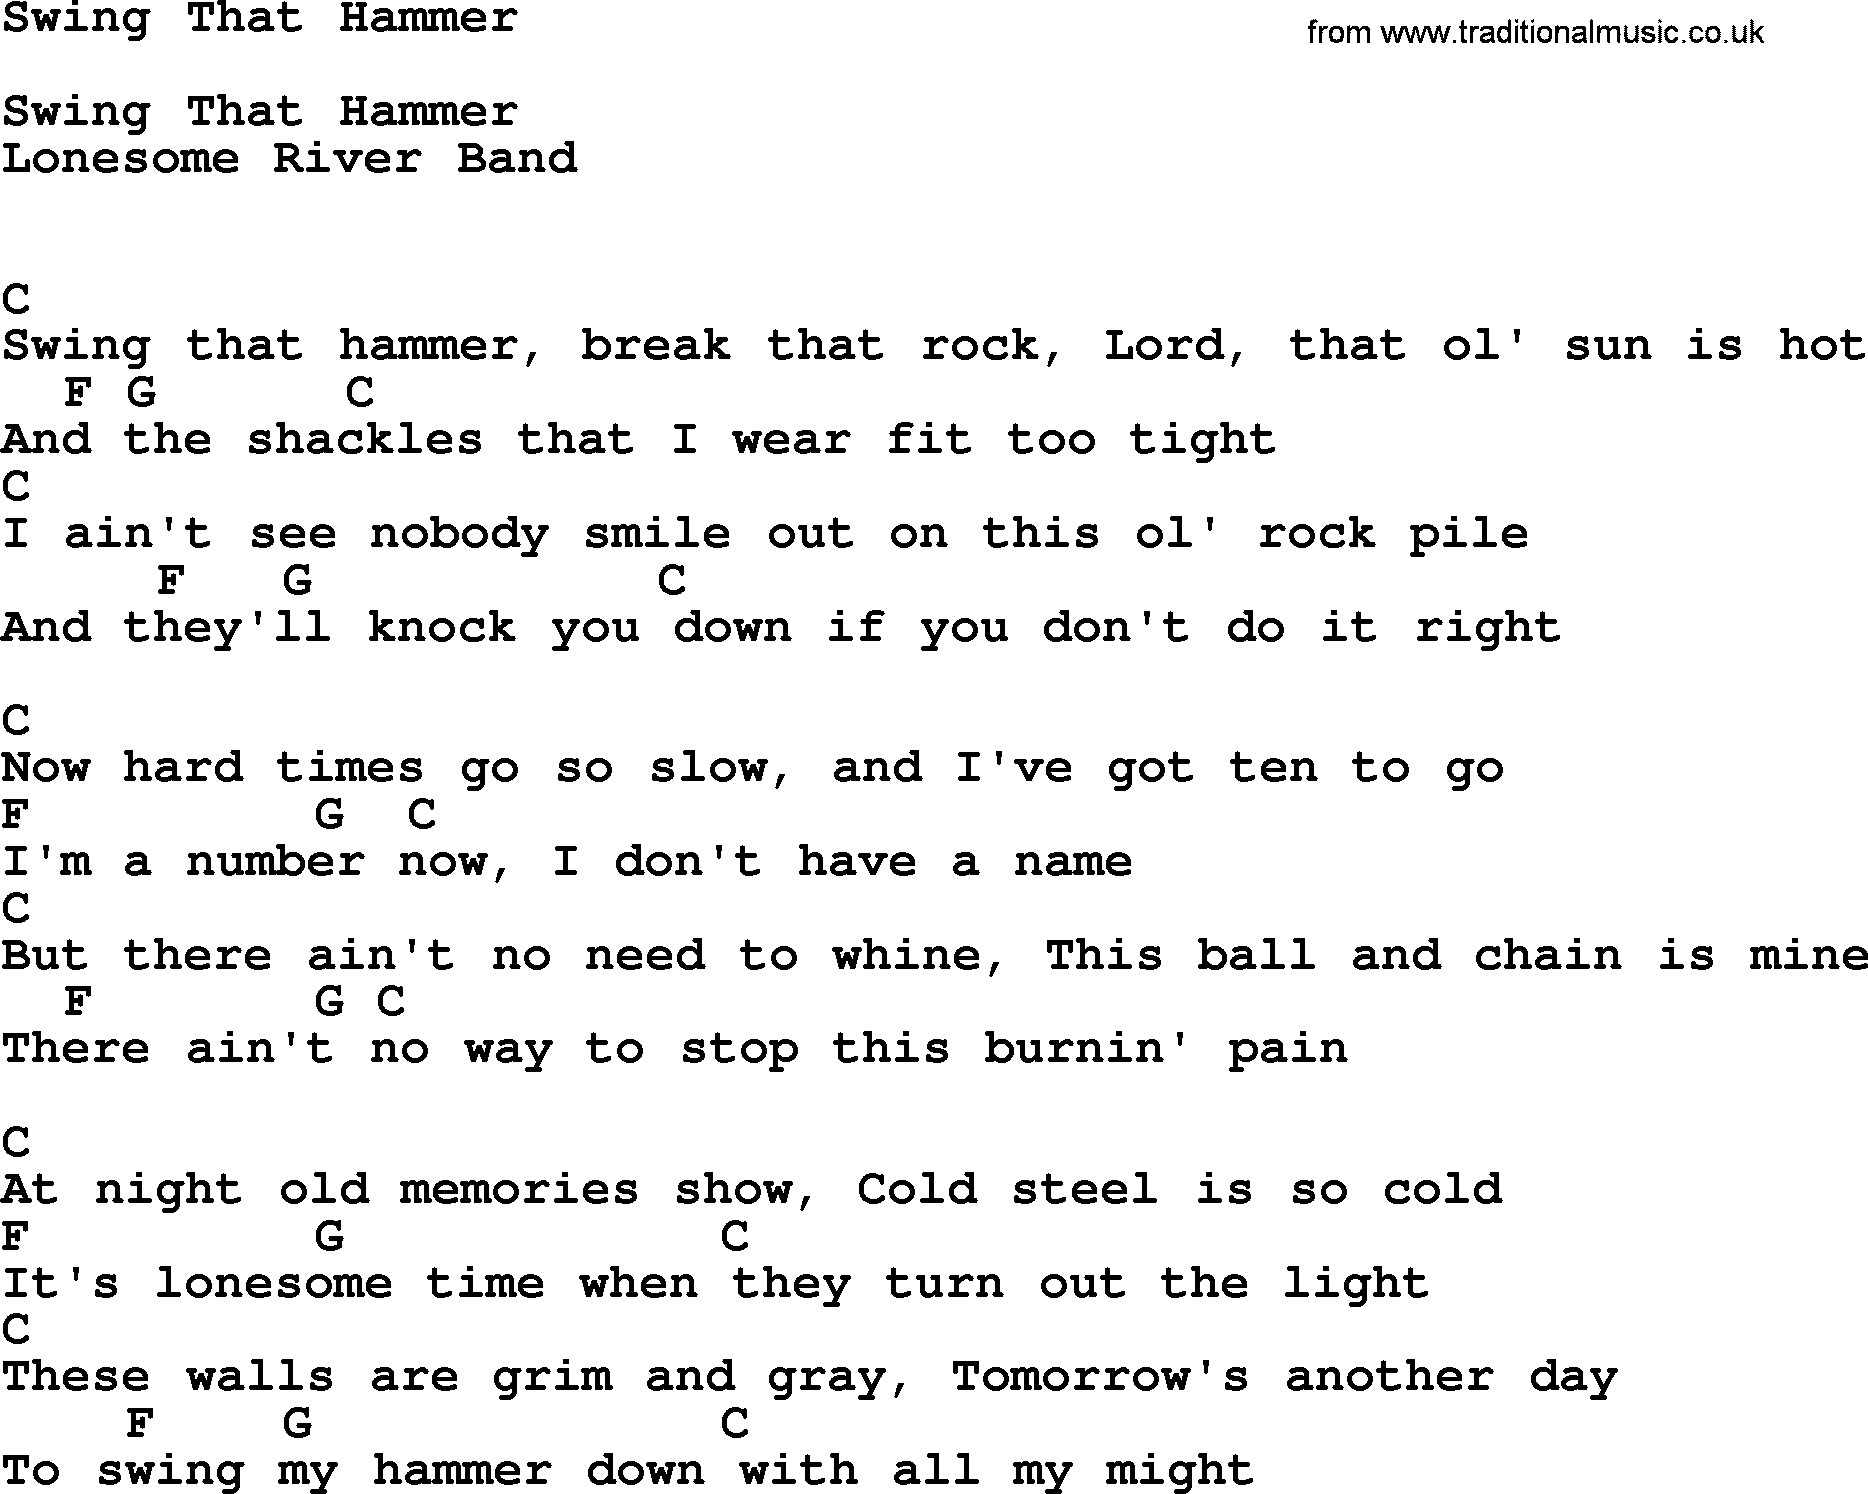 Bluegrass song: Swing That Hammer, lyrics and chords